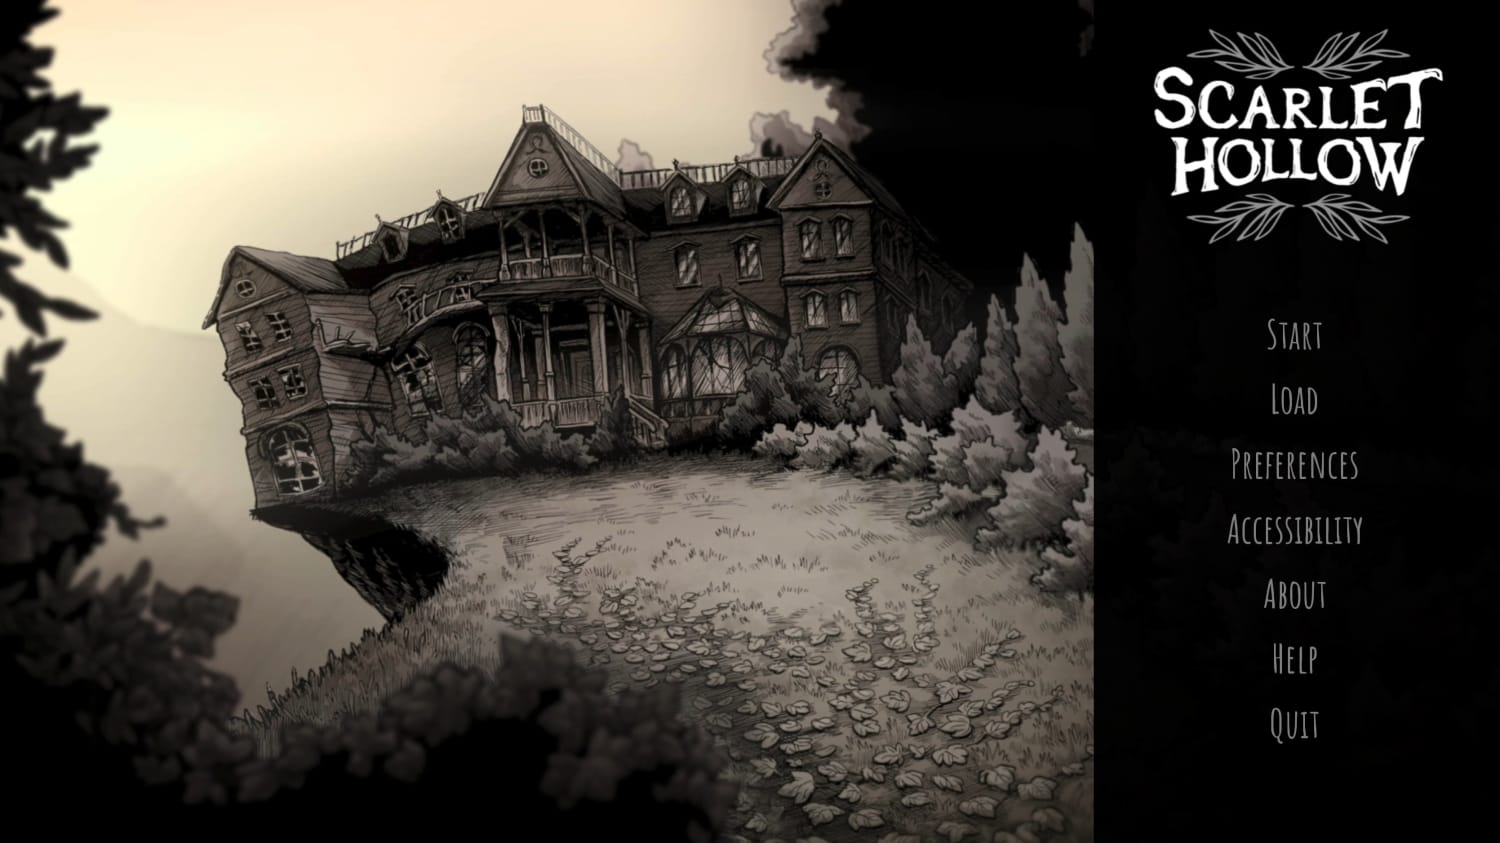 Scarlet Hollow, our traditionally hand-drawn and inked horror adventure game just entered Steam Early Access